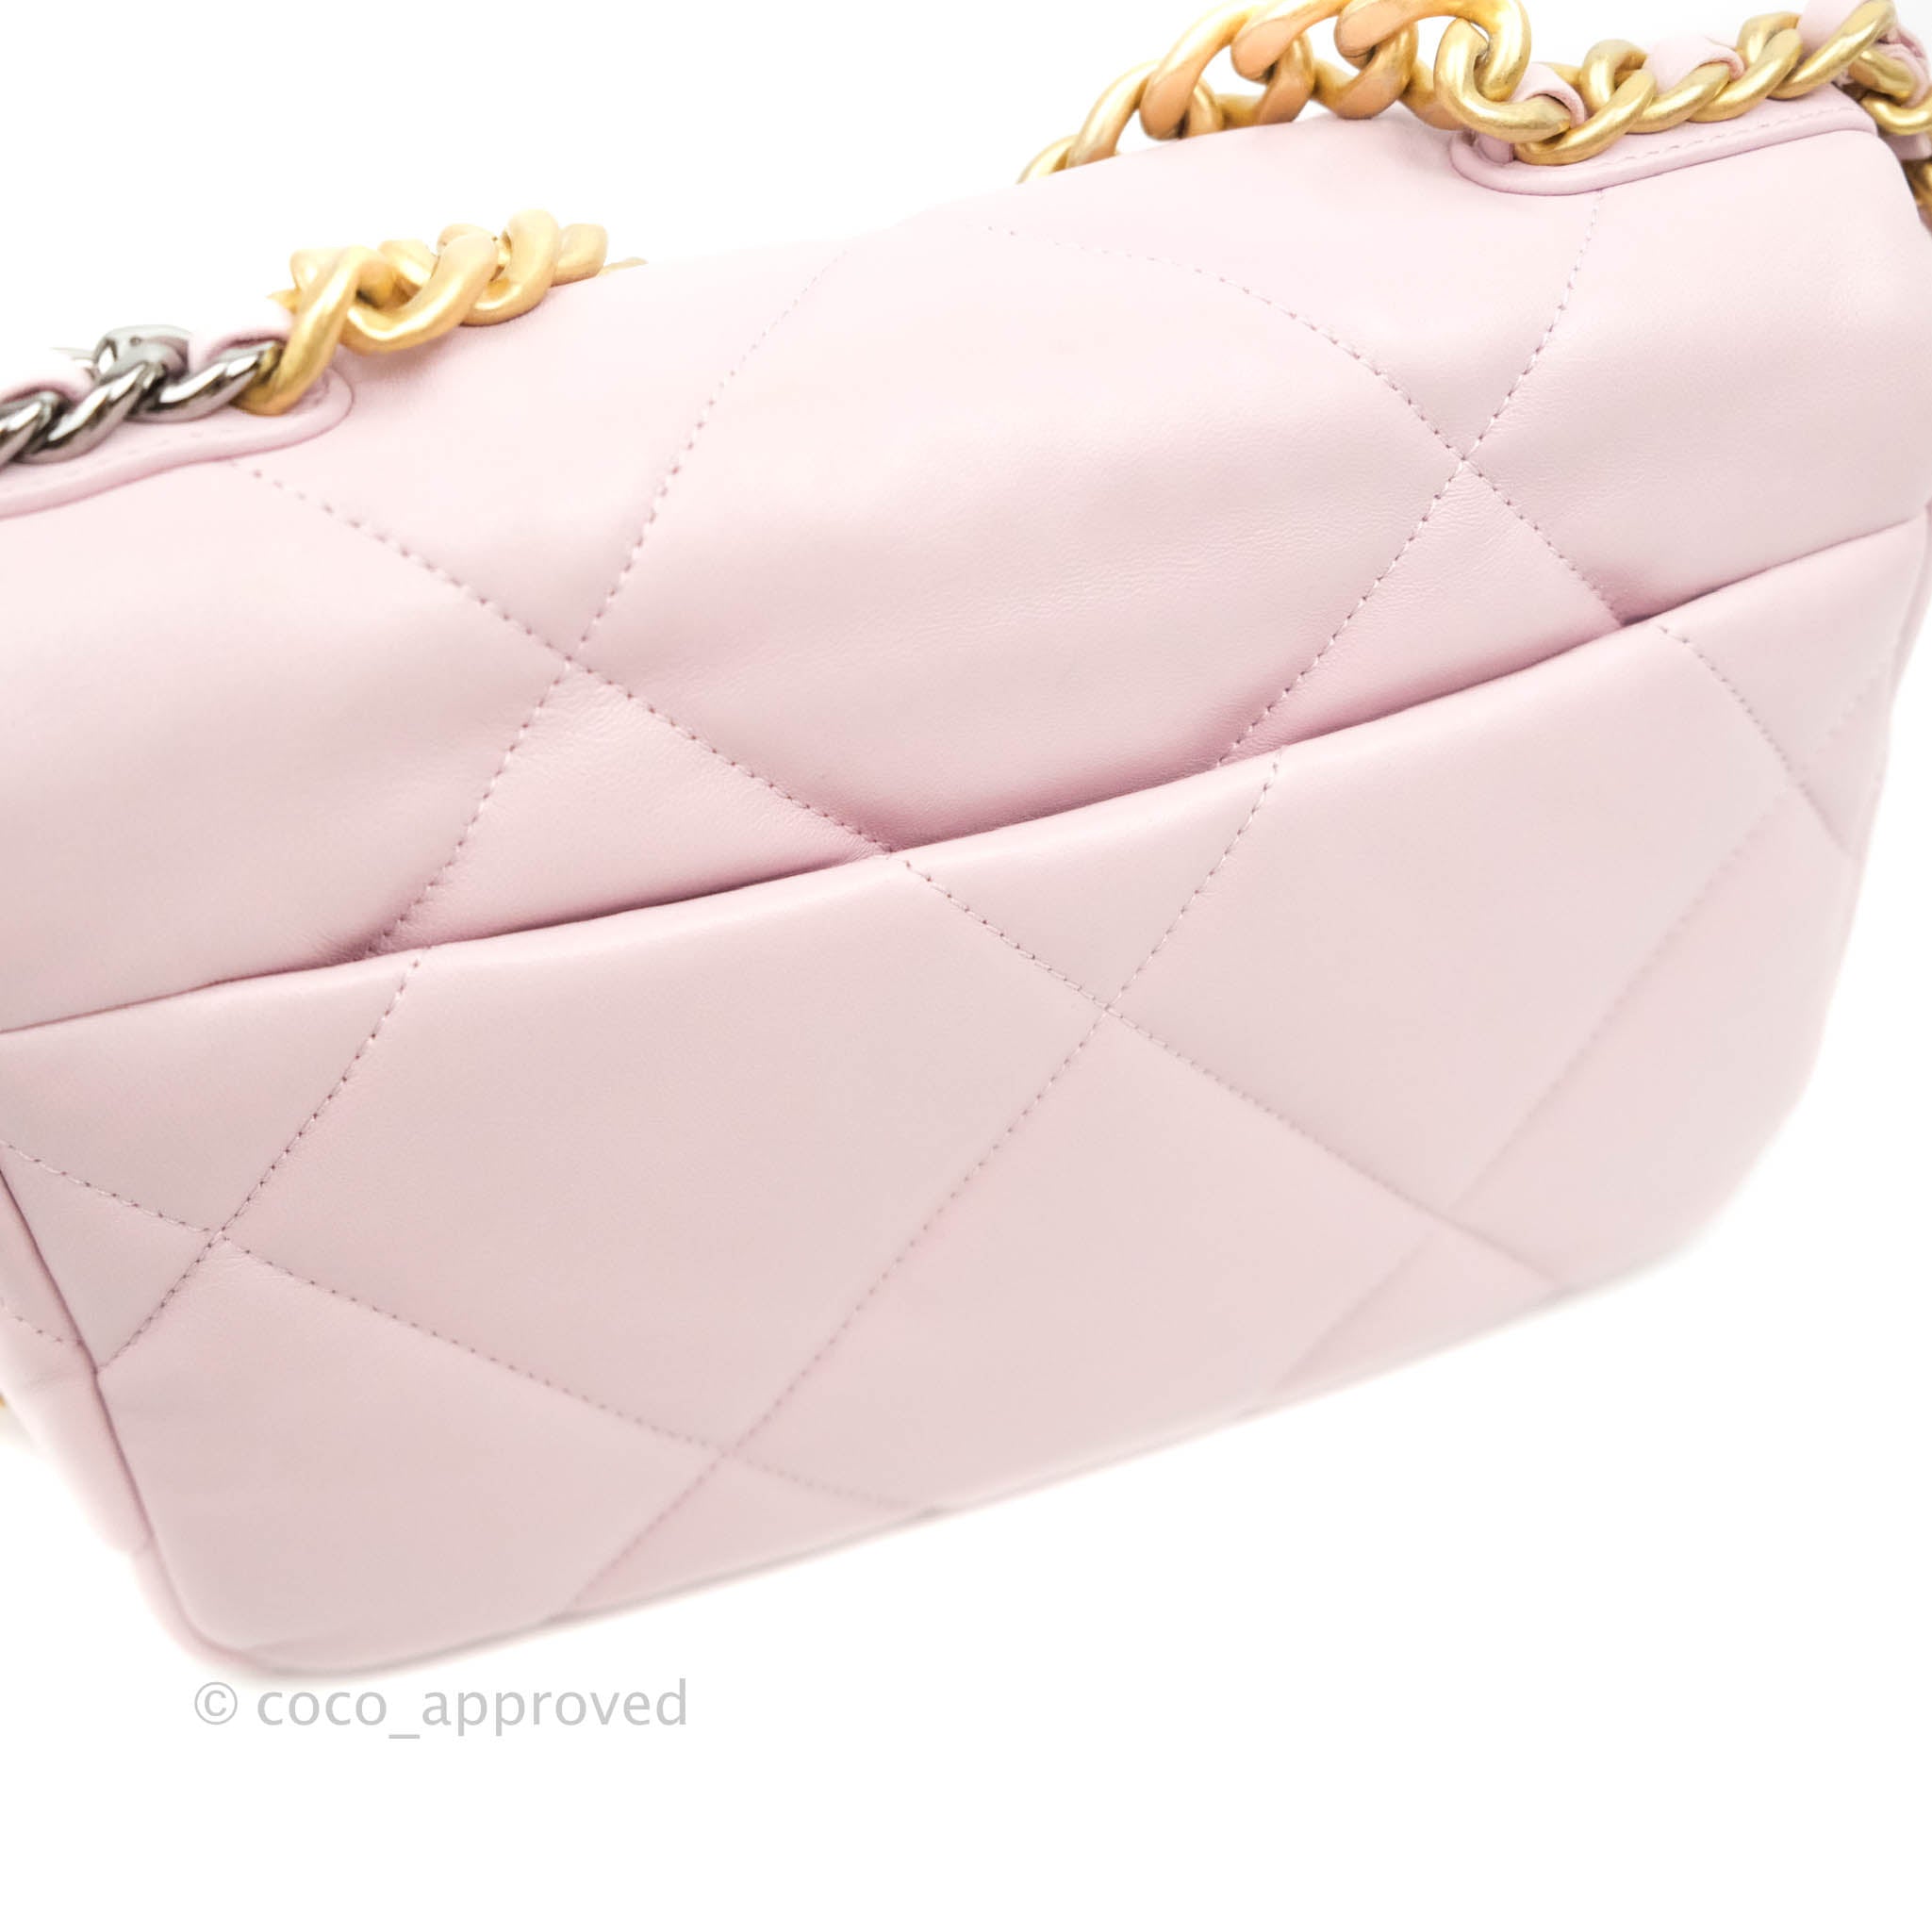 Chanel Lambskin Quilted Medium Chanel 19 Flap Light Pink